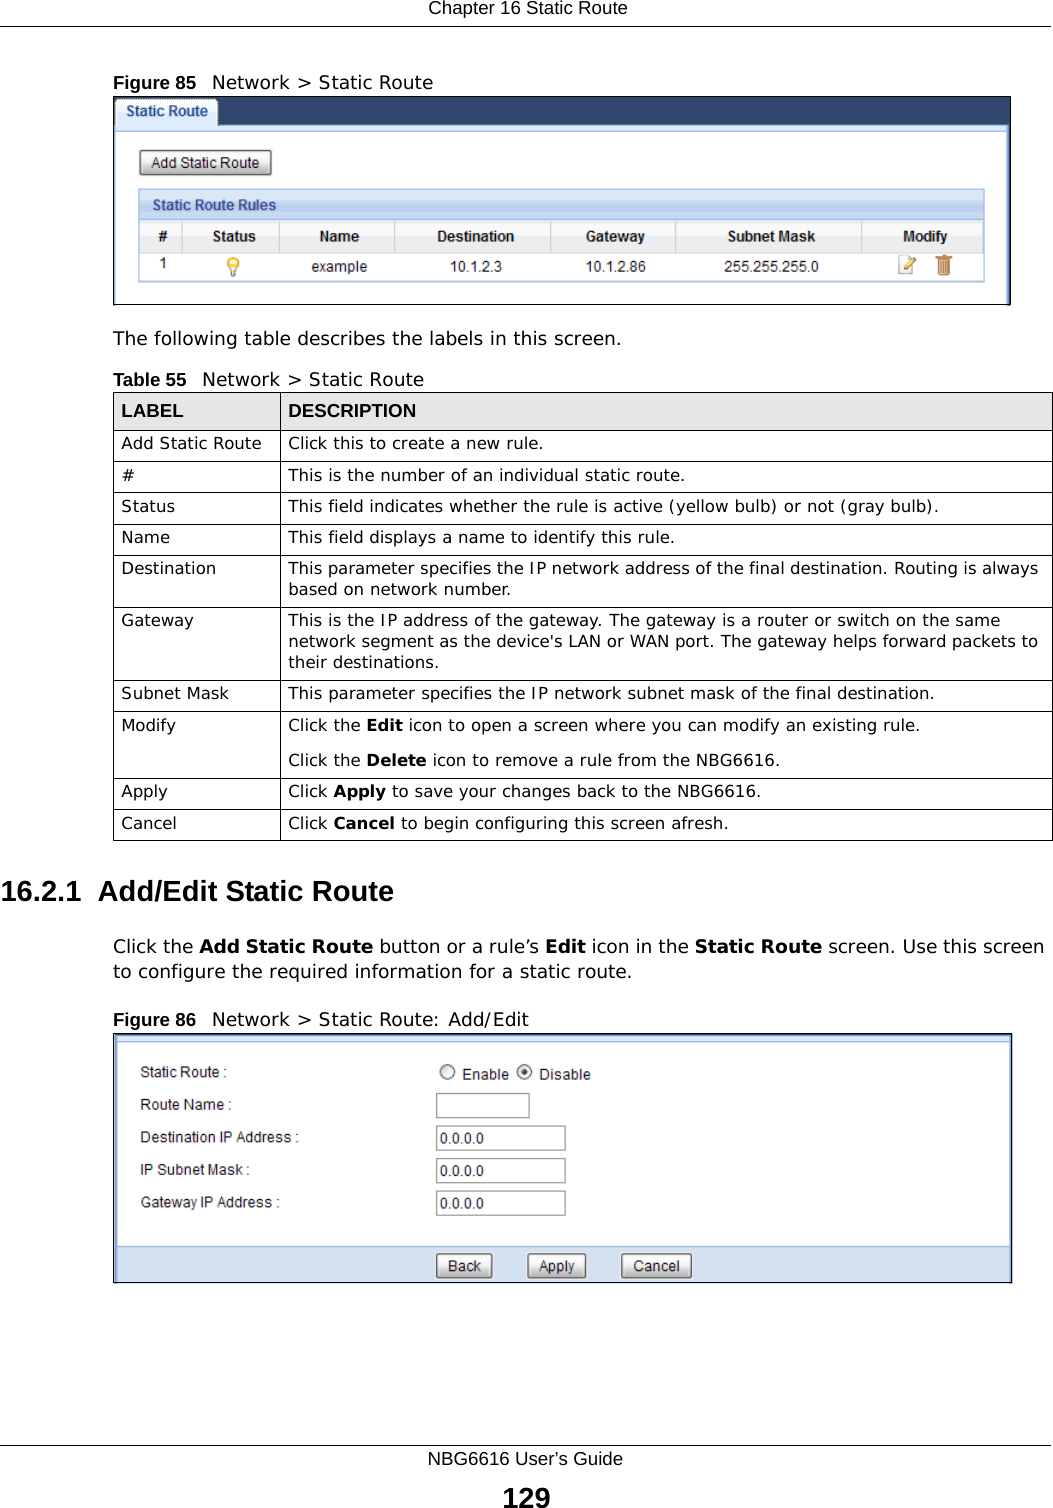  Chapter 16 Static RouteNBG6616 User’s Guide129Figure 85   Network &gt; Static RouteThe following table describes the labels in this screen. 16.2.1  Add/Edit Static Route  Click the Add Static Route button or a rule’s Edit icon in the Static Route screen. Use this screen to configure the required information for a static route. Figure 86   Network &gt; Static Route: Add/Edit Table 55   Network &gt; Static RouteLABEL DESCRIPTIONAdd Static Route Click this to create a new rule.#This is the number of an individual static route.Status This field indicates whether the rule is active (yellow bulb) or not (gray bulb).Name This field displays a name to identify this rule.Destination This parameter specifies the IP network address of the final destination. Routing is always based on network number. Gateway This is the IP address of the gateway. The gateway is a router or switch on the same network segment as the device&apos;s LAN or WAN port. The gateway helps forward packets to their destinations.Subnet Mask This parameter specifies the IP network subnet mask of the final destination.Modify Click the Edit icon to open a screen where you can modify an existing rule. Click the Delete icon to remove a rule from the NBG6616.Apply Click Apply to save your changes back to the NBG6616.Cancel Click Cancel to begin configuring this screen afresh.